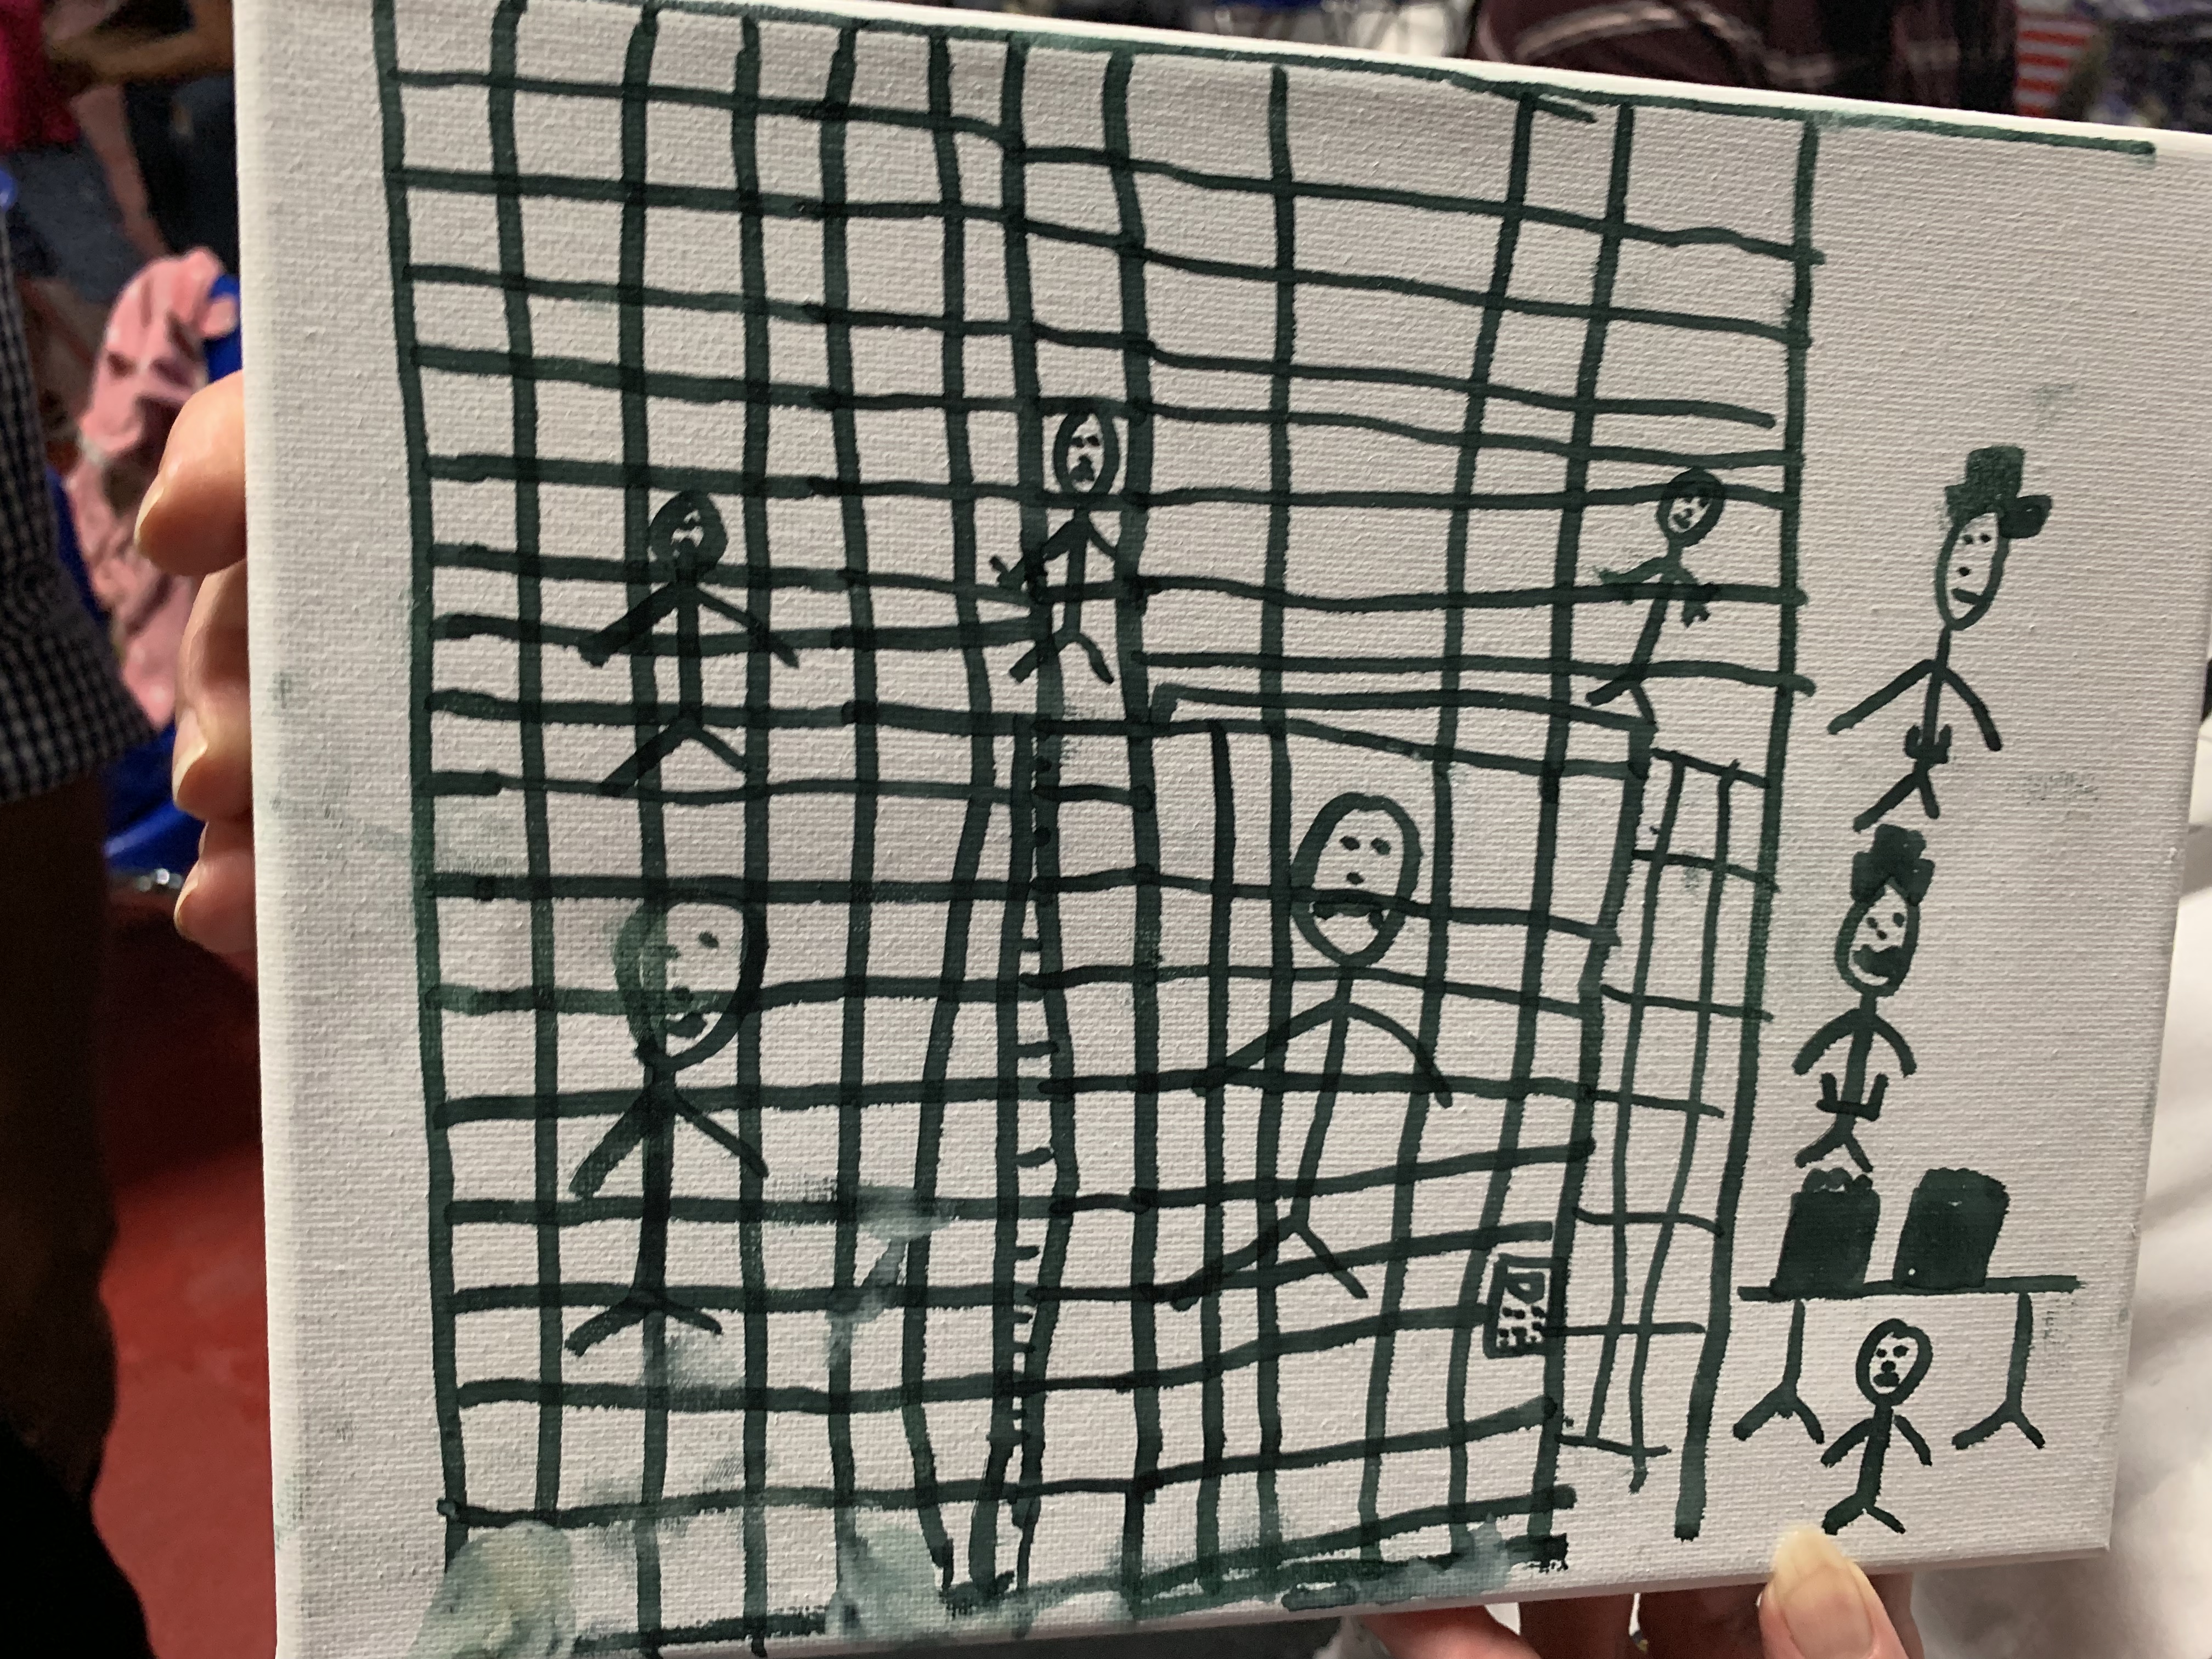 The American Academy of Pediatrics (AAP) released drawings by migrant children depicting the conditions inside Border Patrol detention facilities. (Courtesy American Academy of Pediatrics)